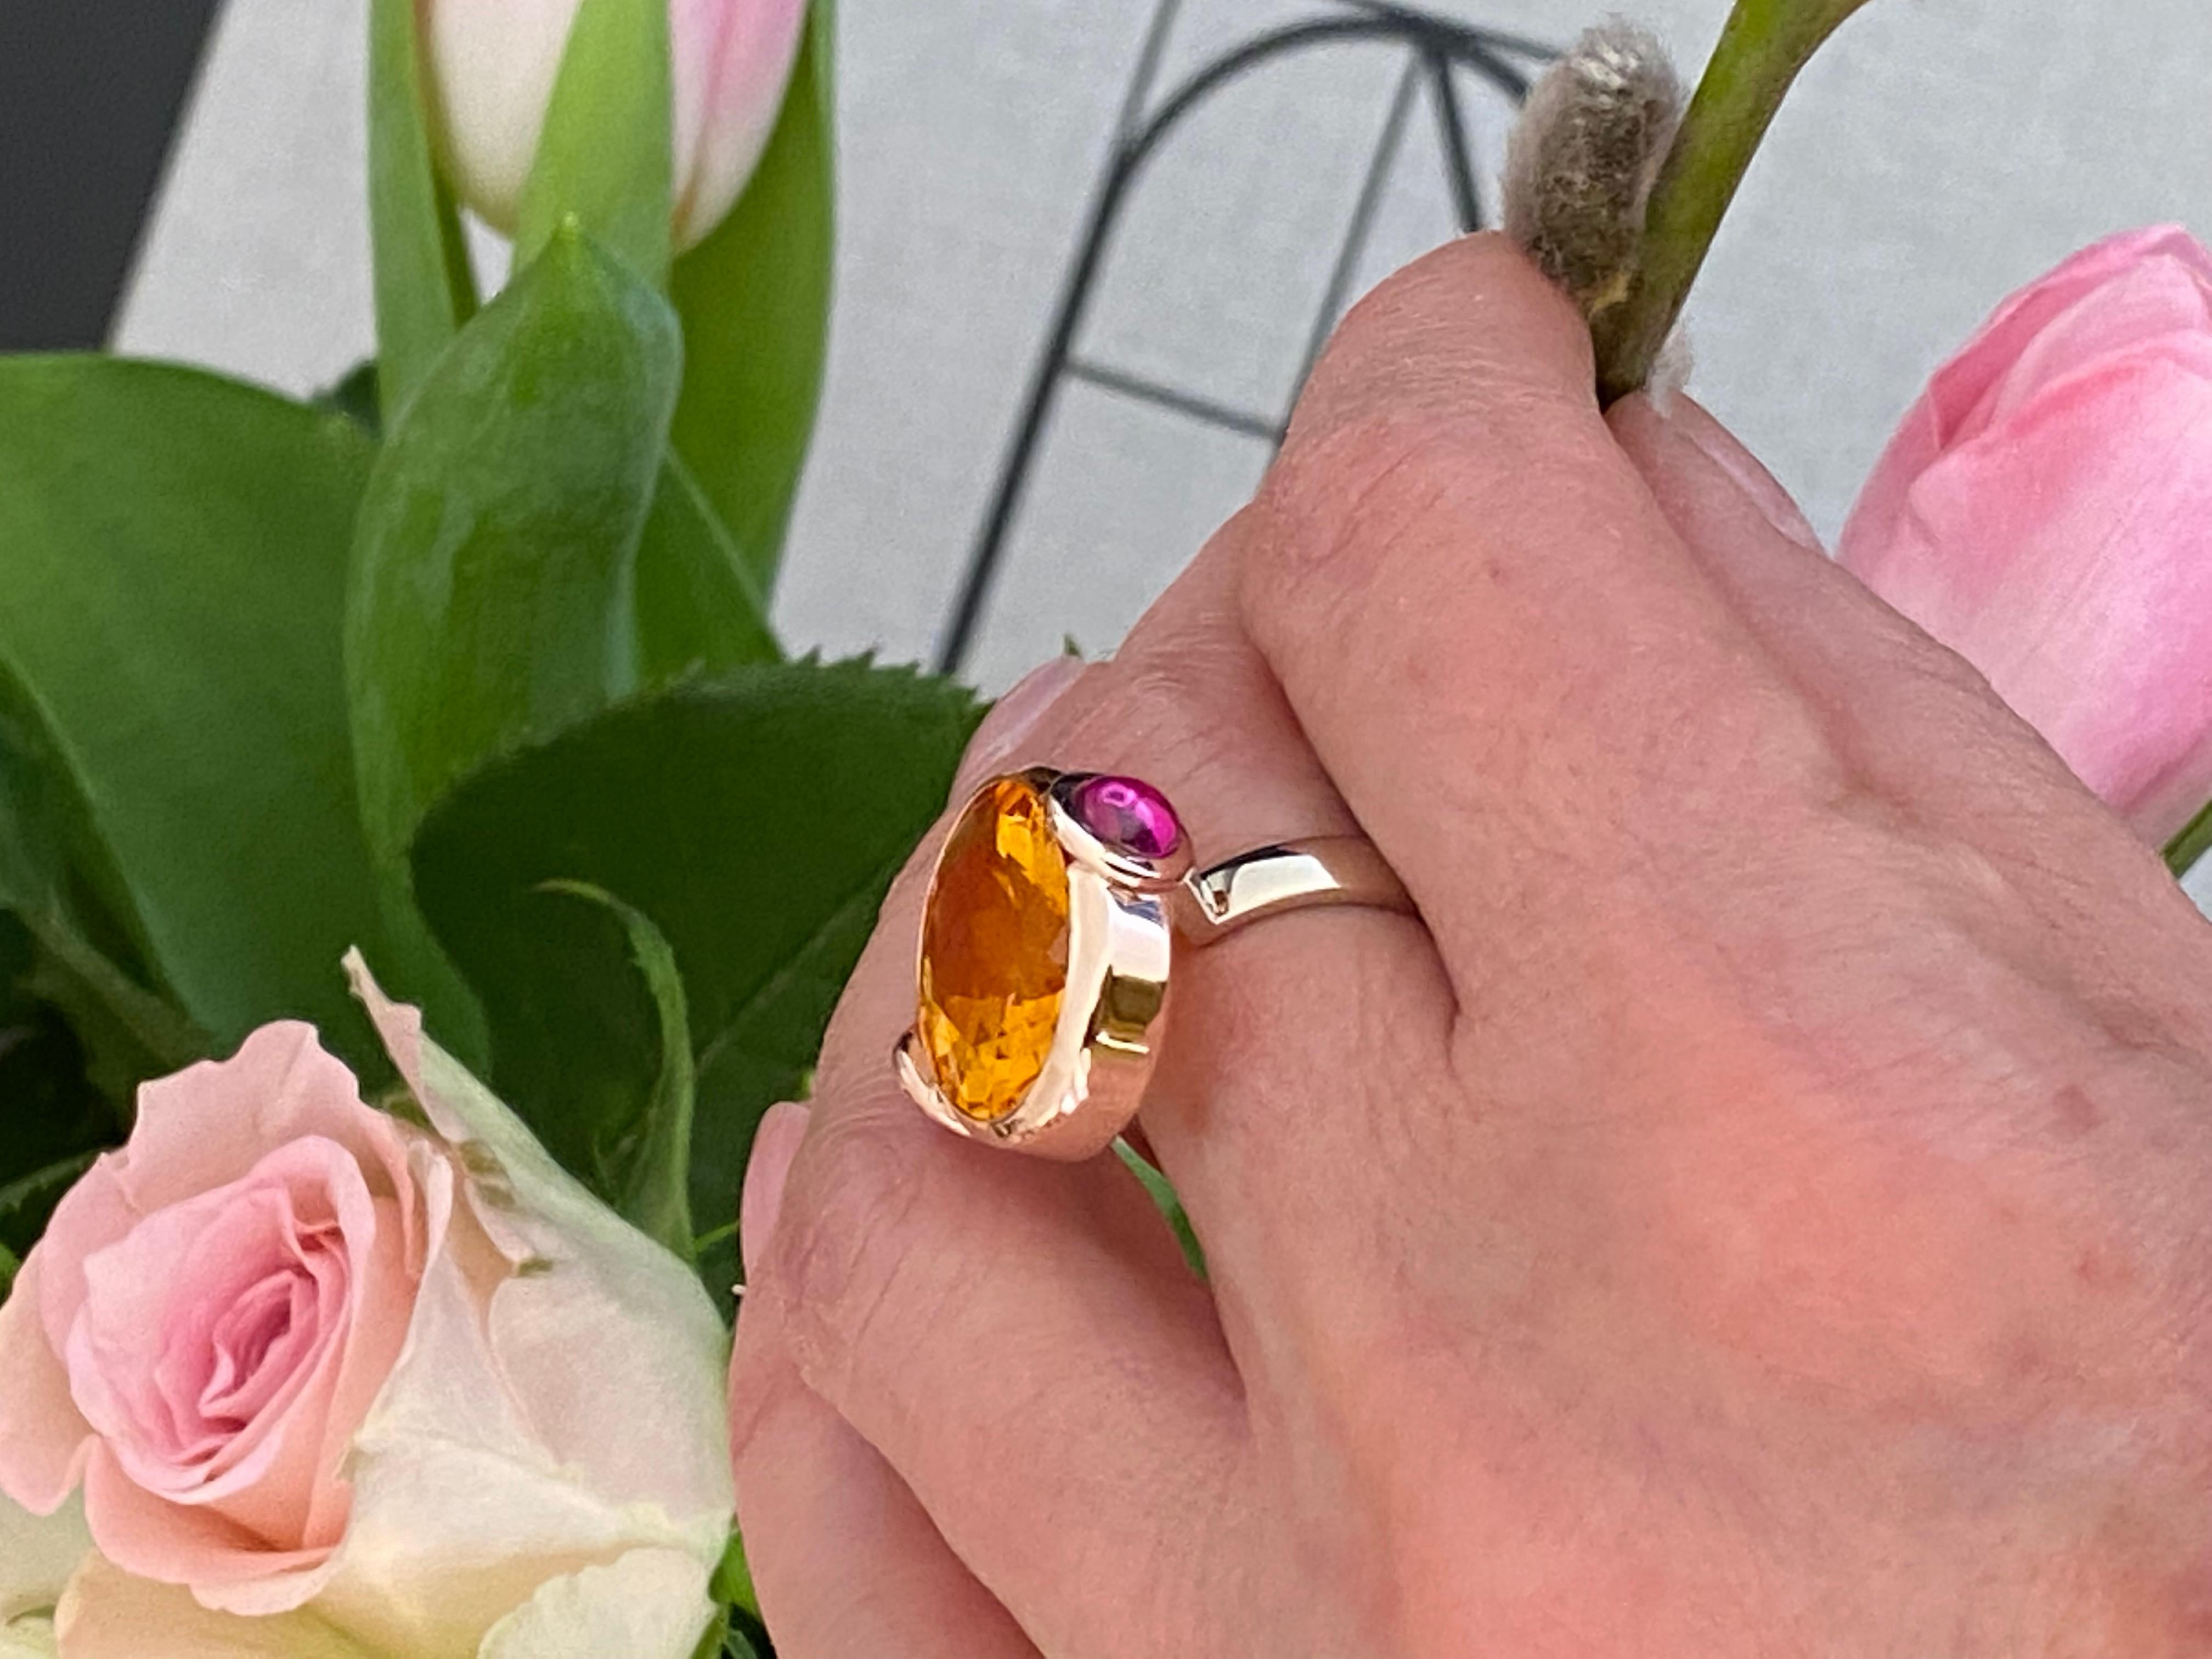 Rossella Ugolini Design Collection Deco Style 18 Karat Yellow and White Gold Citrine Amethyst Cabochon Candy Cocktail Ring.
The character of the Citrine Candy ring is almost tangible, thanks certainly to the size of the yellow Citrine gemstone it